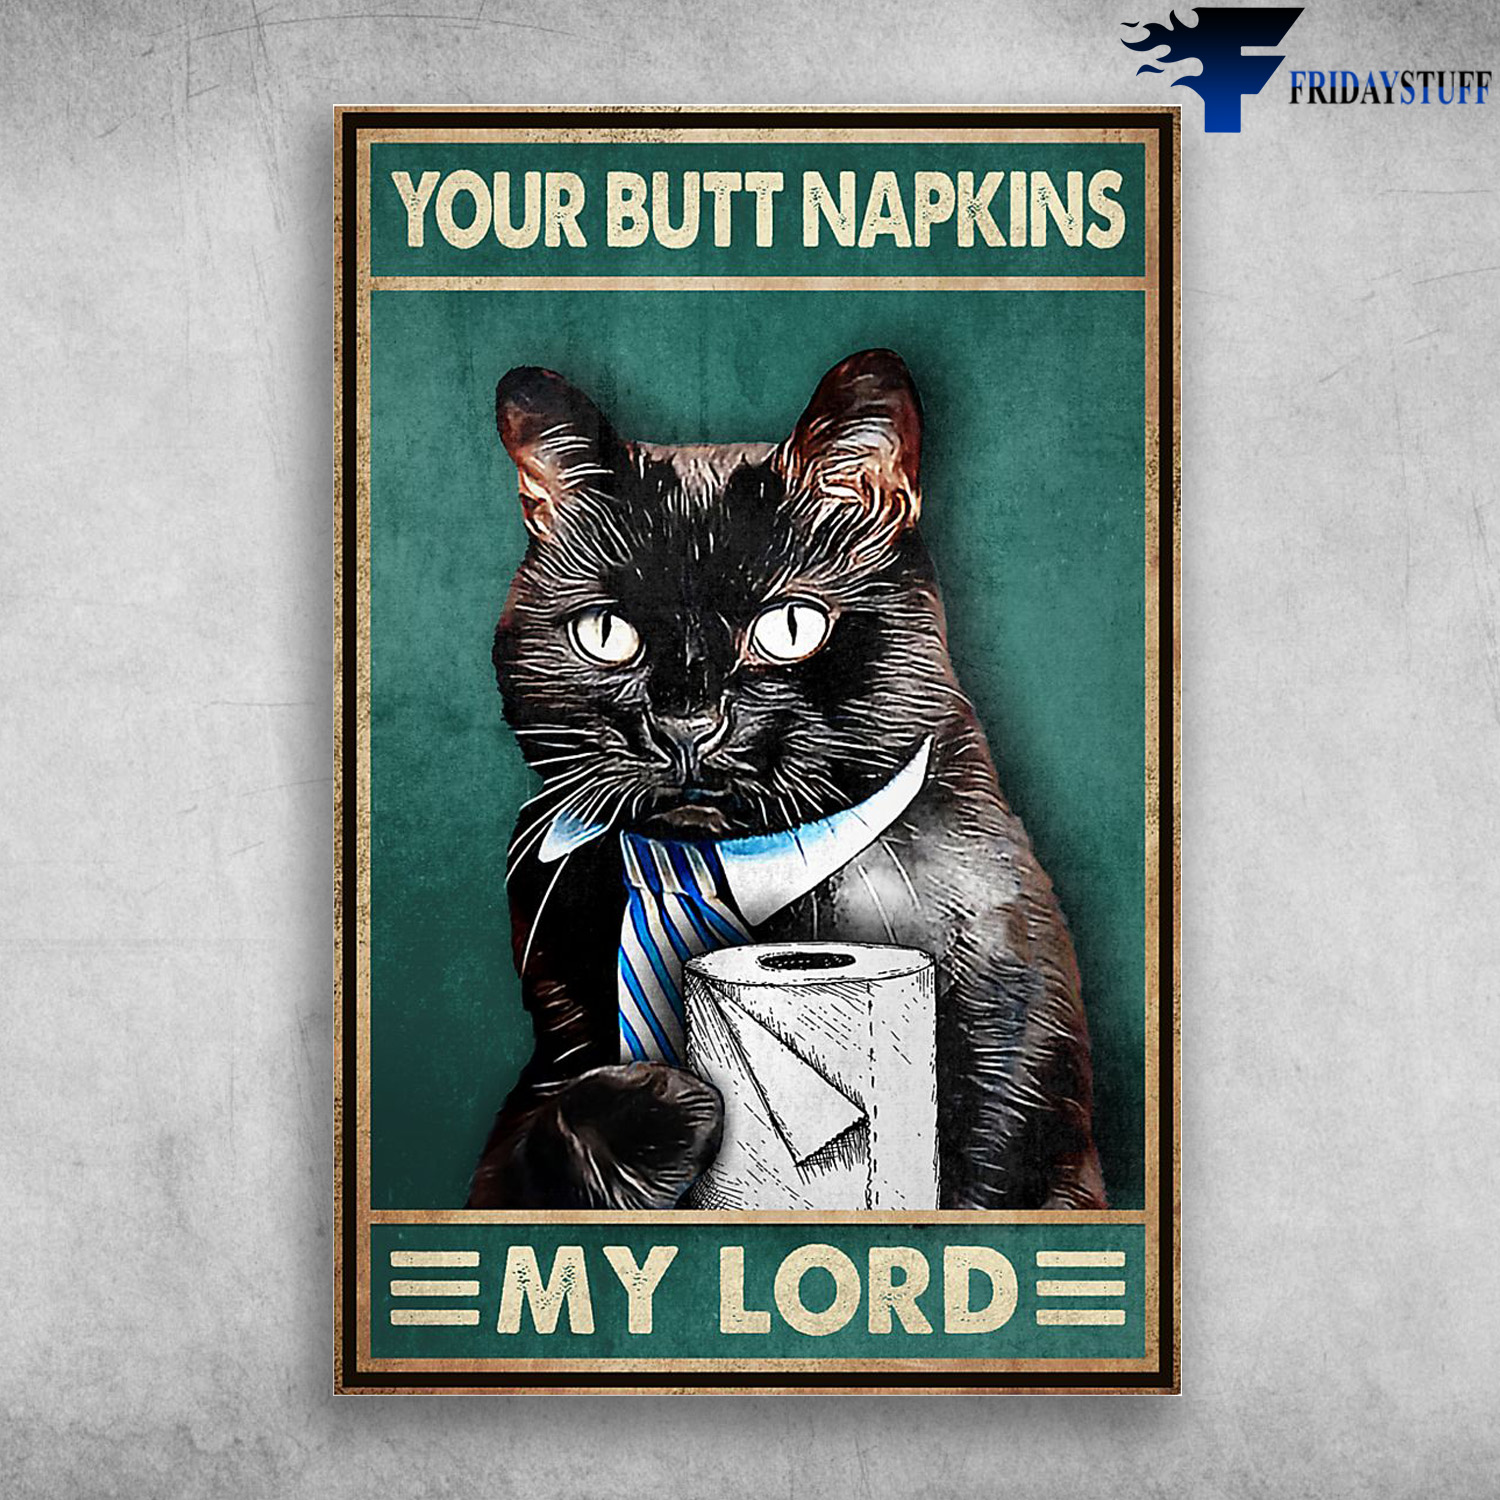 Black Cat And Toilet Paper Rolls - Your Butt Napkins My Lord